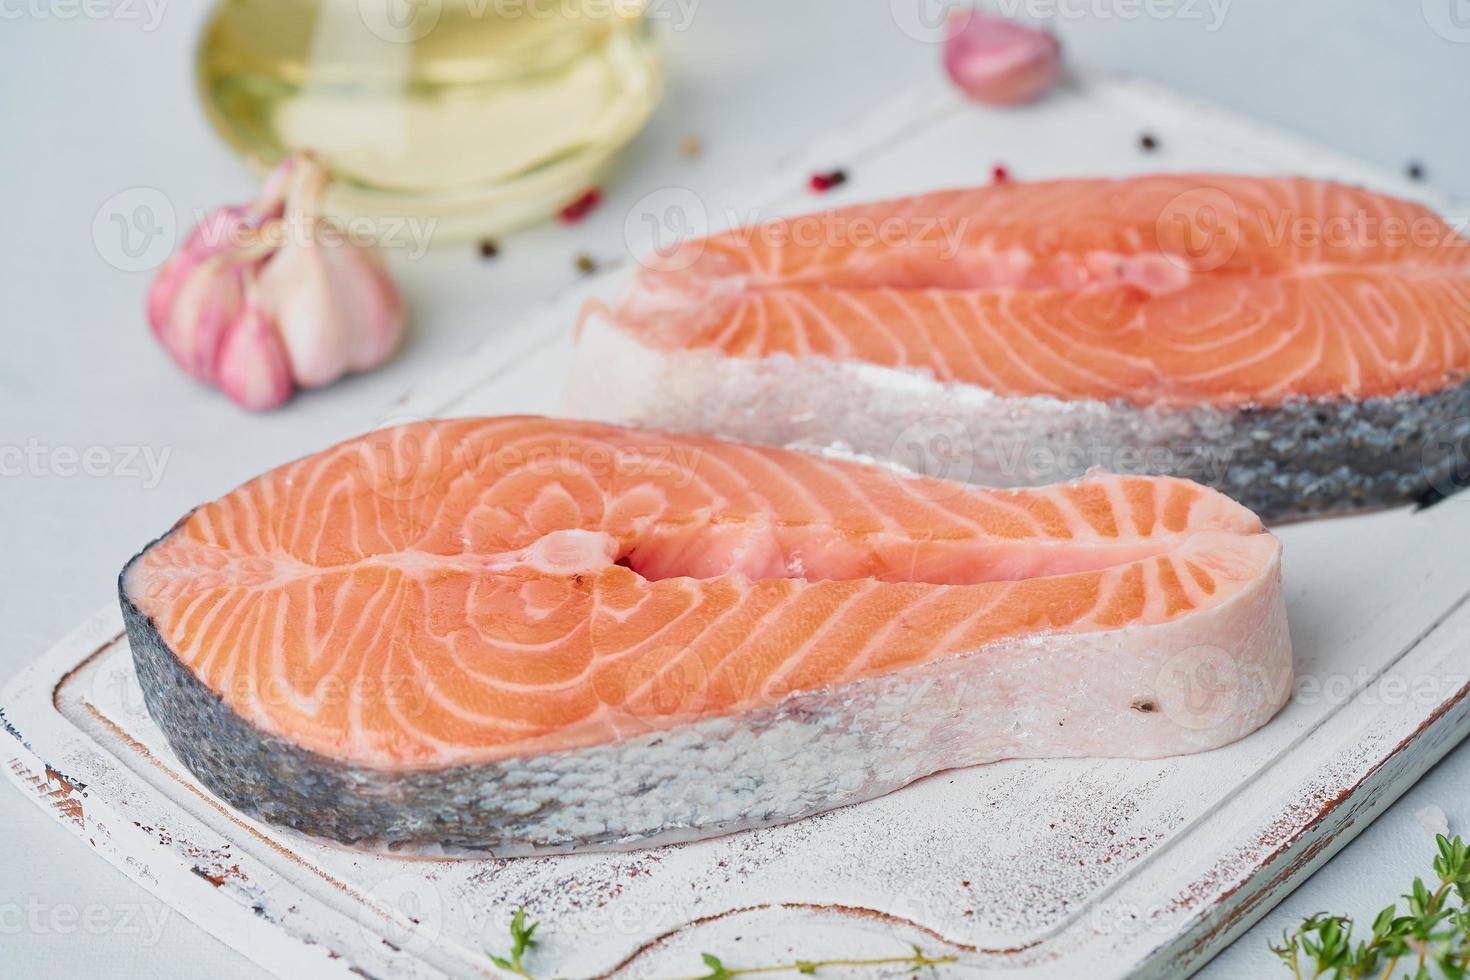 Two salmon steaks, top view, close up. Fish fillet, large sliced portions on a chopping board photo